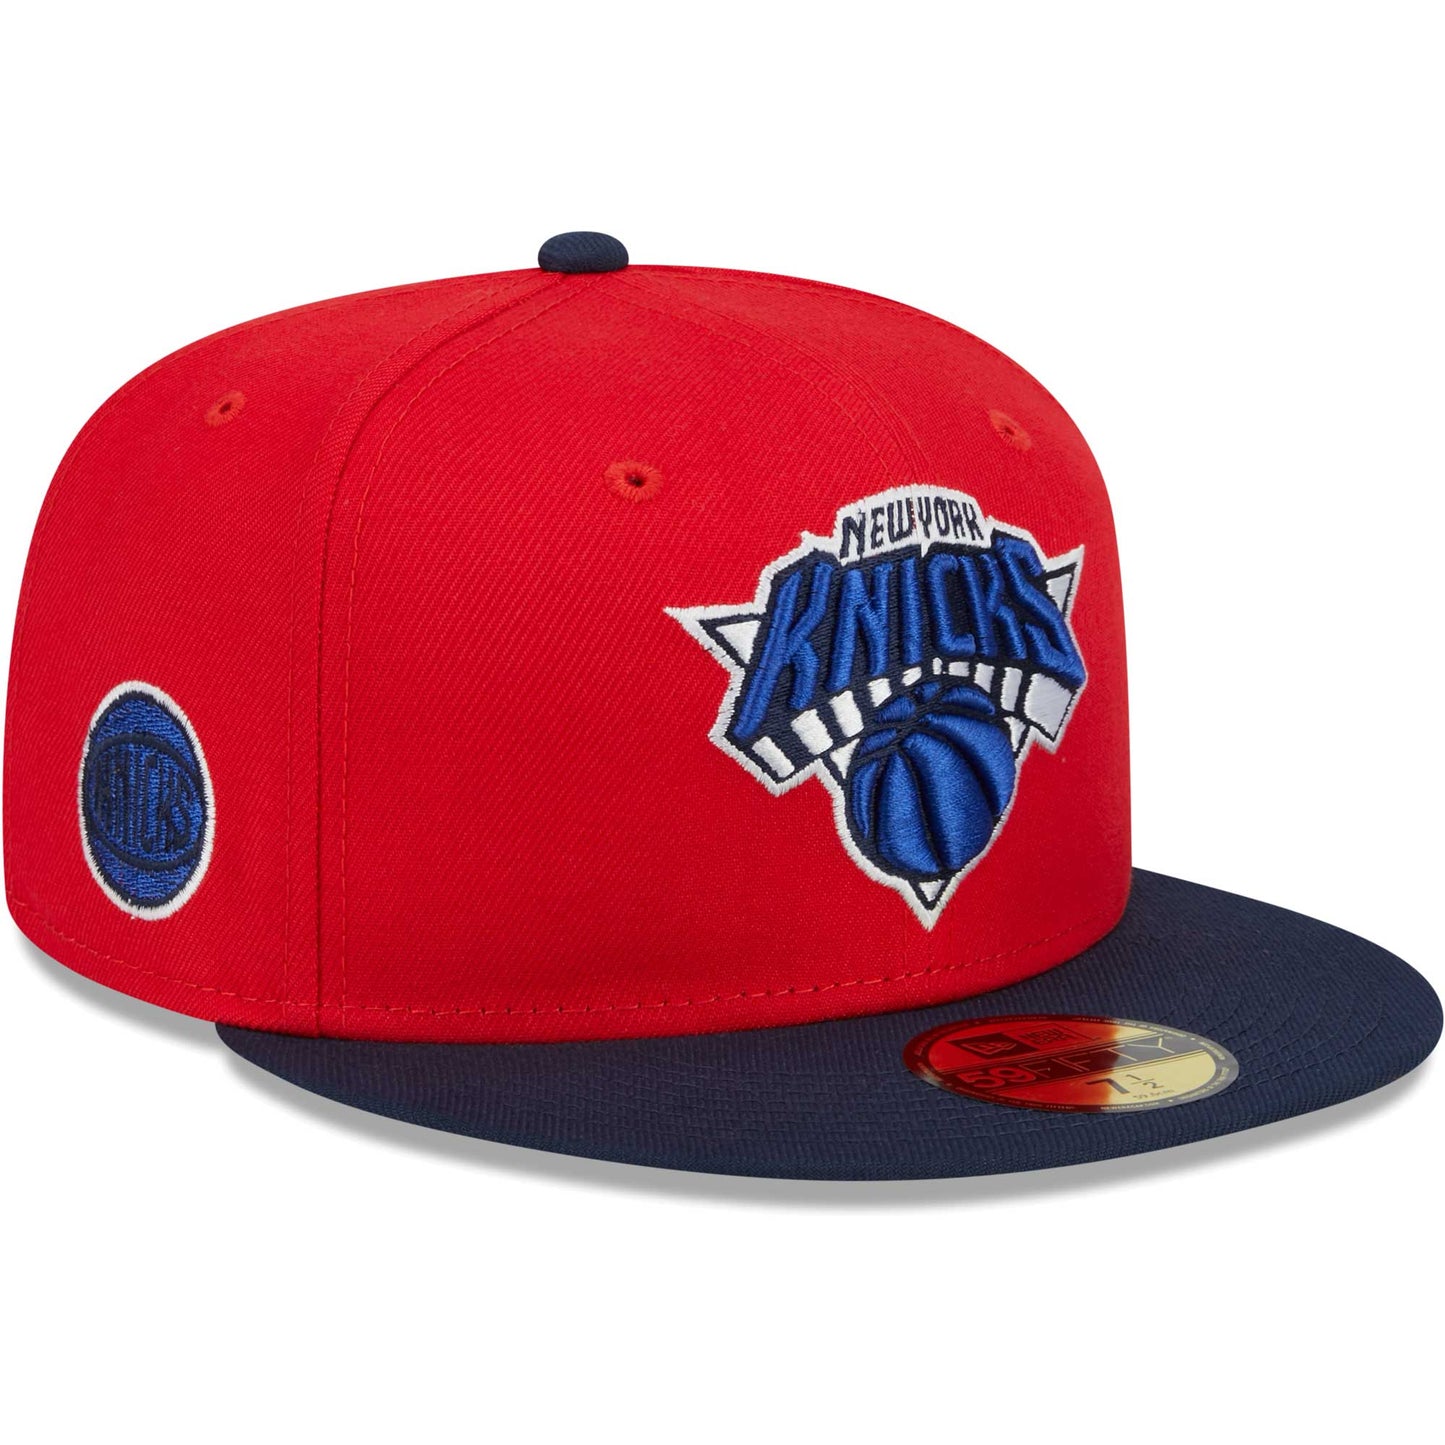 New York Knicks New Era 59FIFTY Fitted Hat - Red/Navy